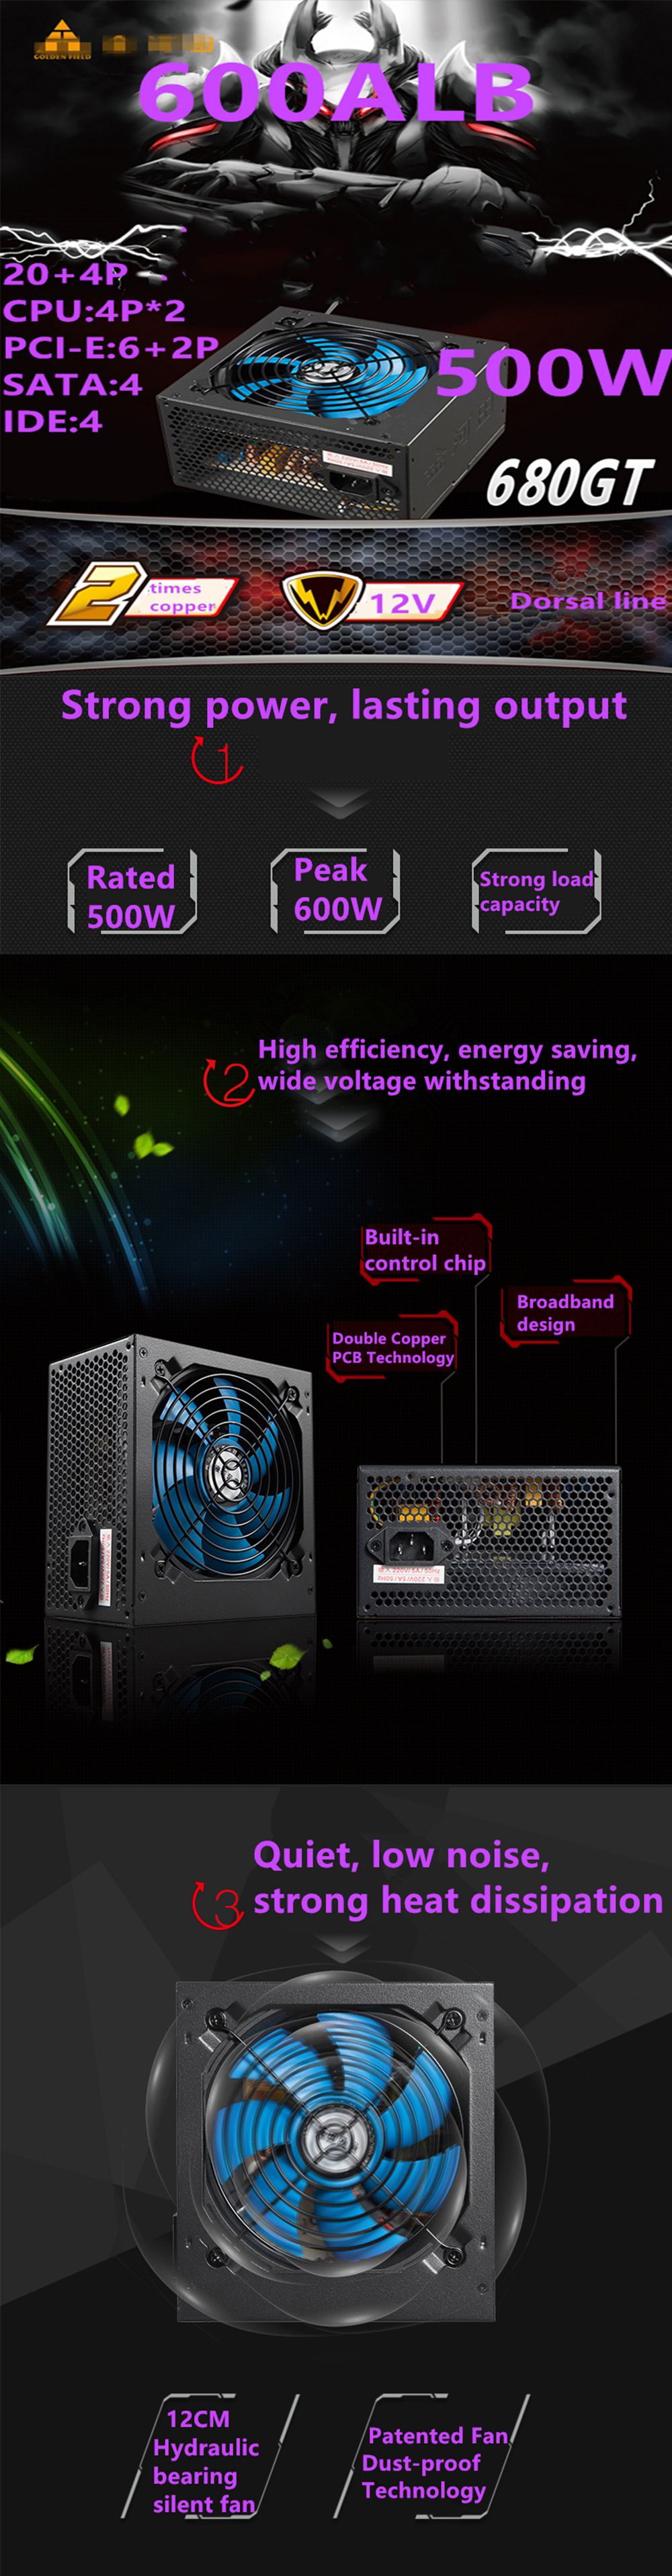 Golden-Field-680GT-600W-ATX-Computer-Power-Supply-Active-PFC-with-Quiet-120mm-Fan-for-PC-Desktop-1603089